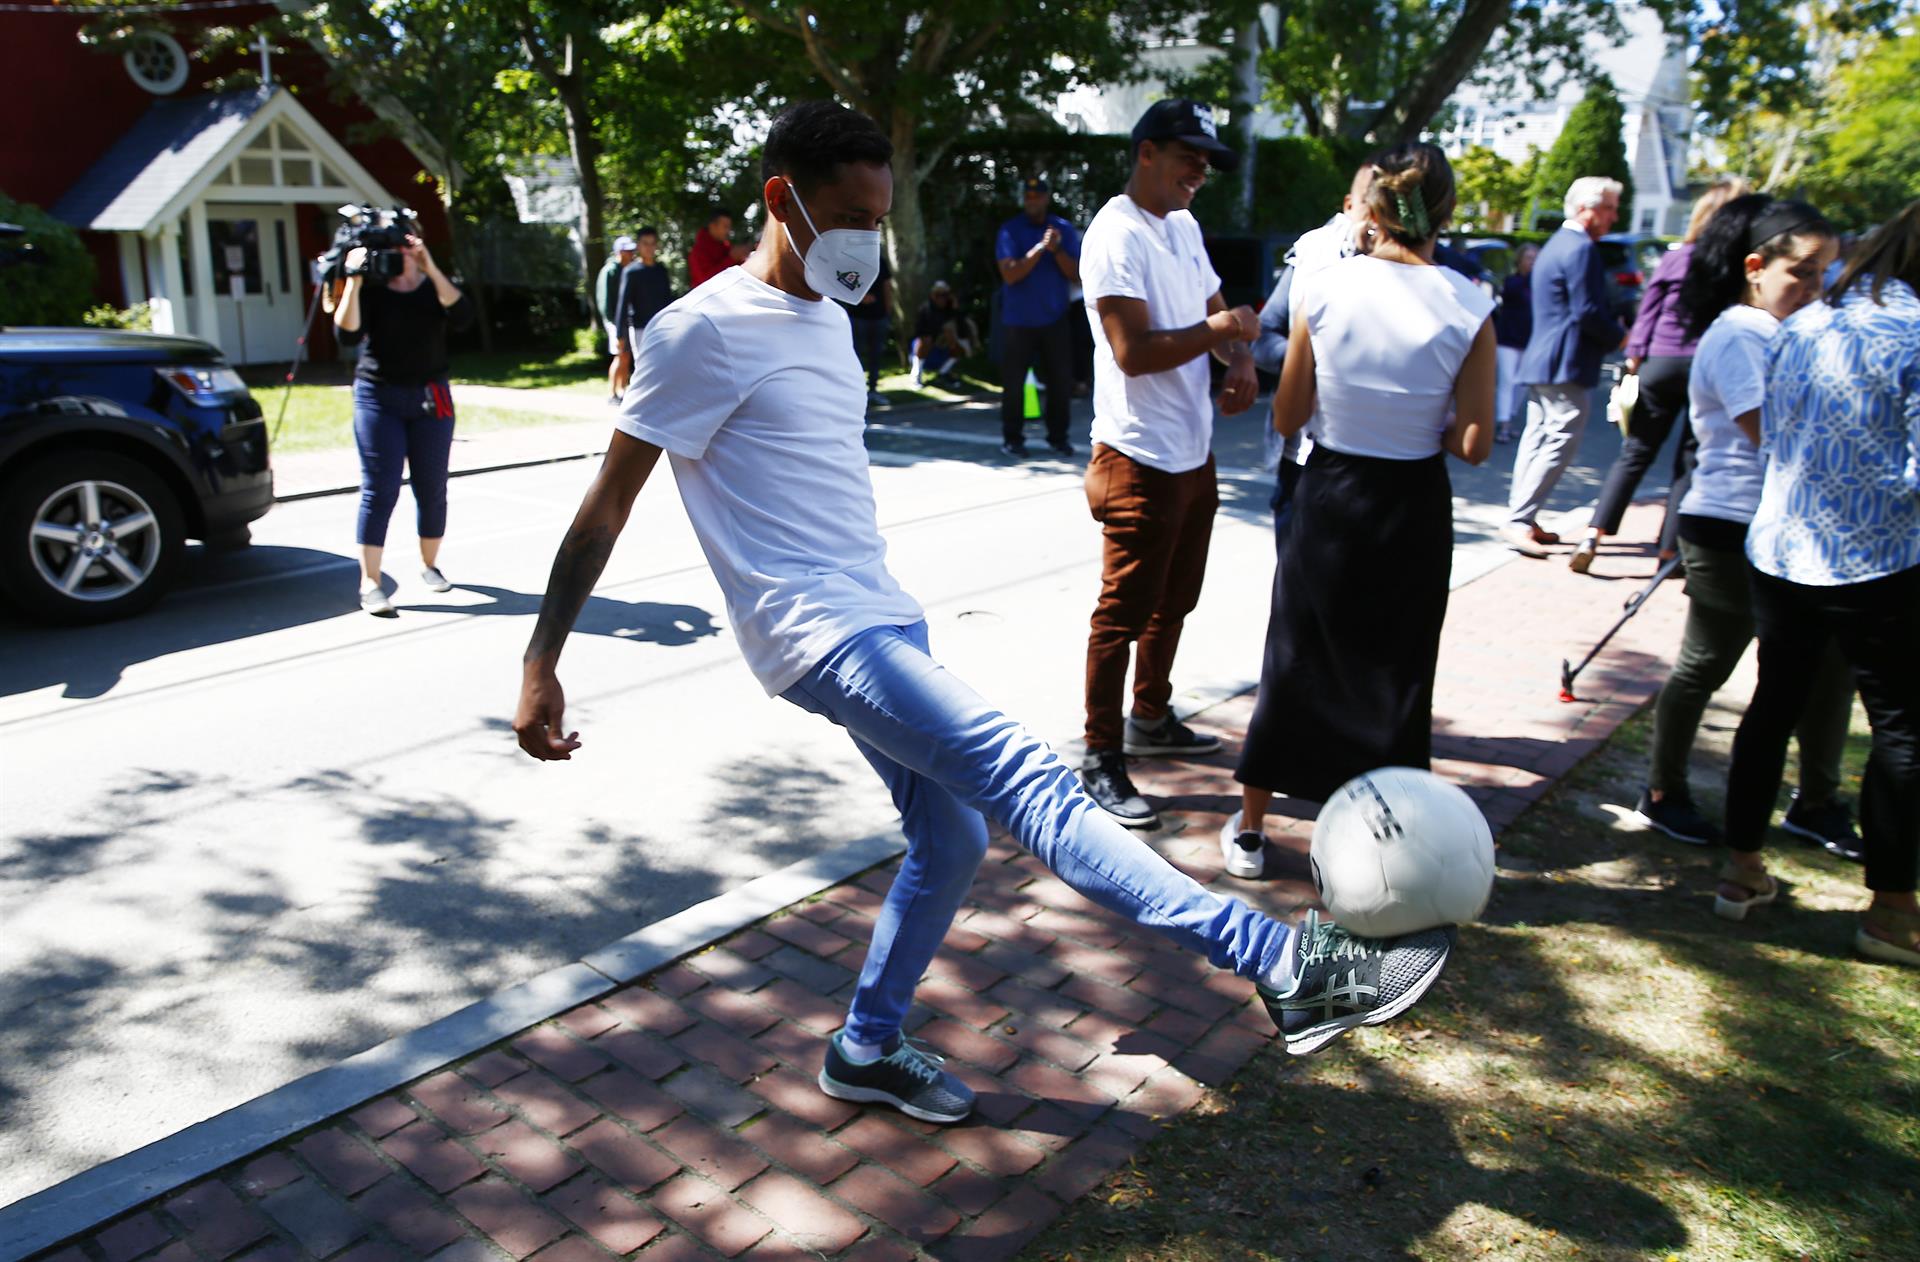 A migrant who is part of a group of nearly 50 migrants from Venezuela who were flown to the island of Martha's Vineyard off Cape Cod, Massachusetts on 14 September plays with a soccer ball at the parish house at St. Andrew's Episcopal Church in Edgartown, Massachusetts, USA, 15 September 2022. EPA-EFE/CJ GUNTHER
